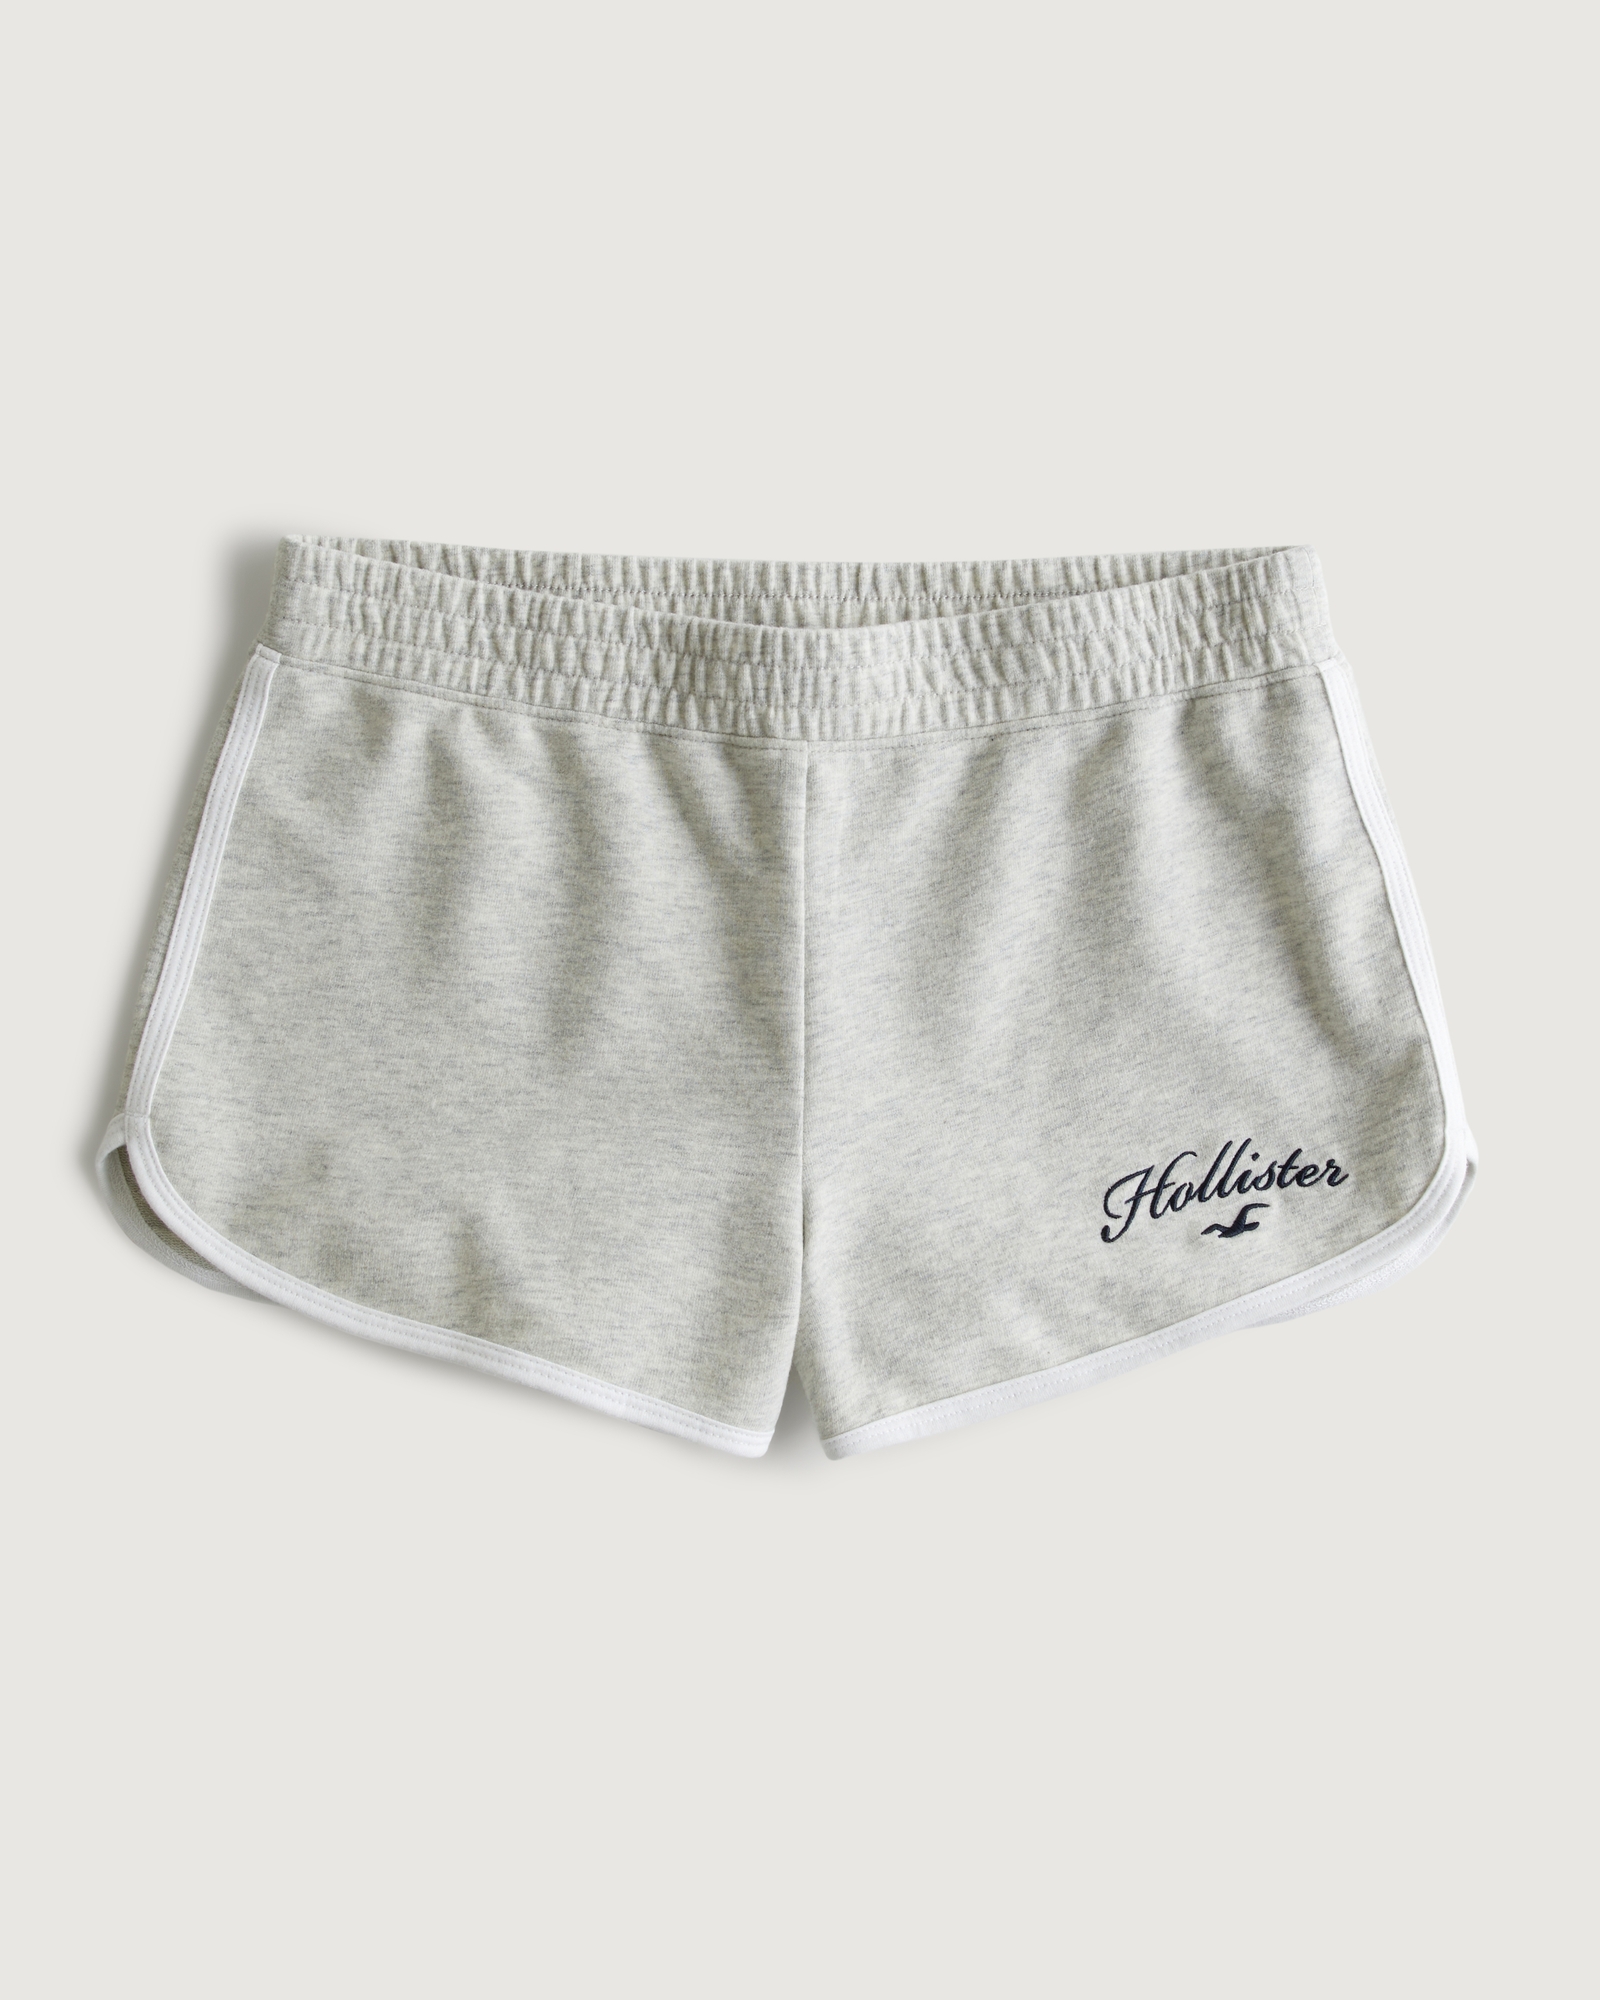 https://img.hollisterco.com/is/image/anf/KIC_349-3346-0323-112_prod1.jpg?policy=product-extra-large